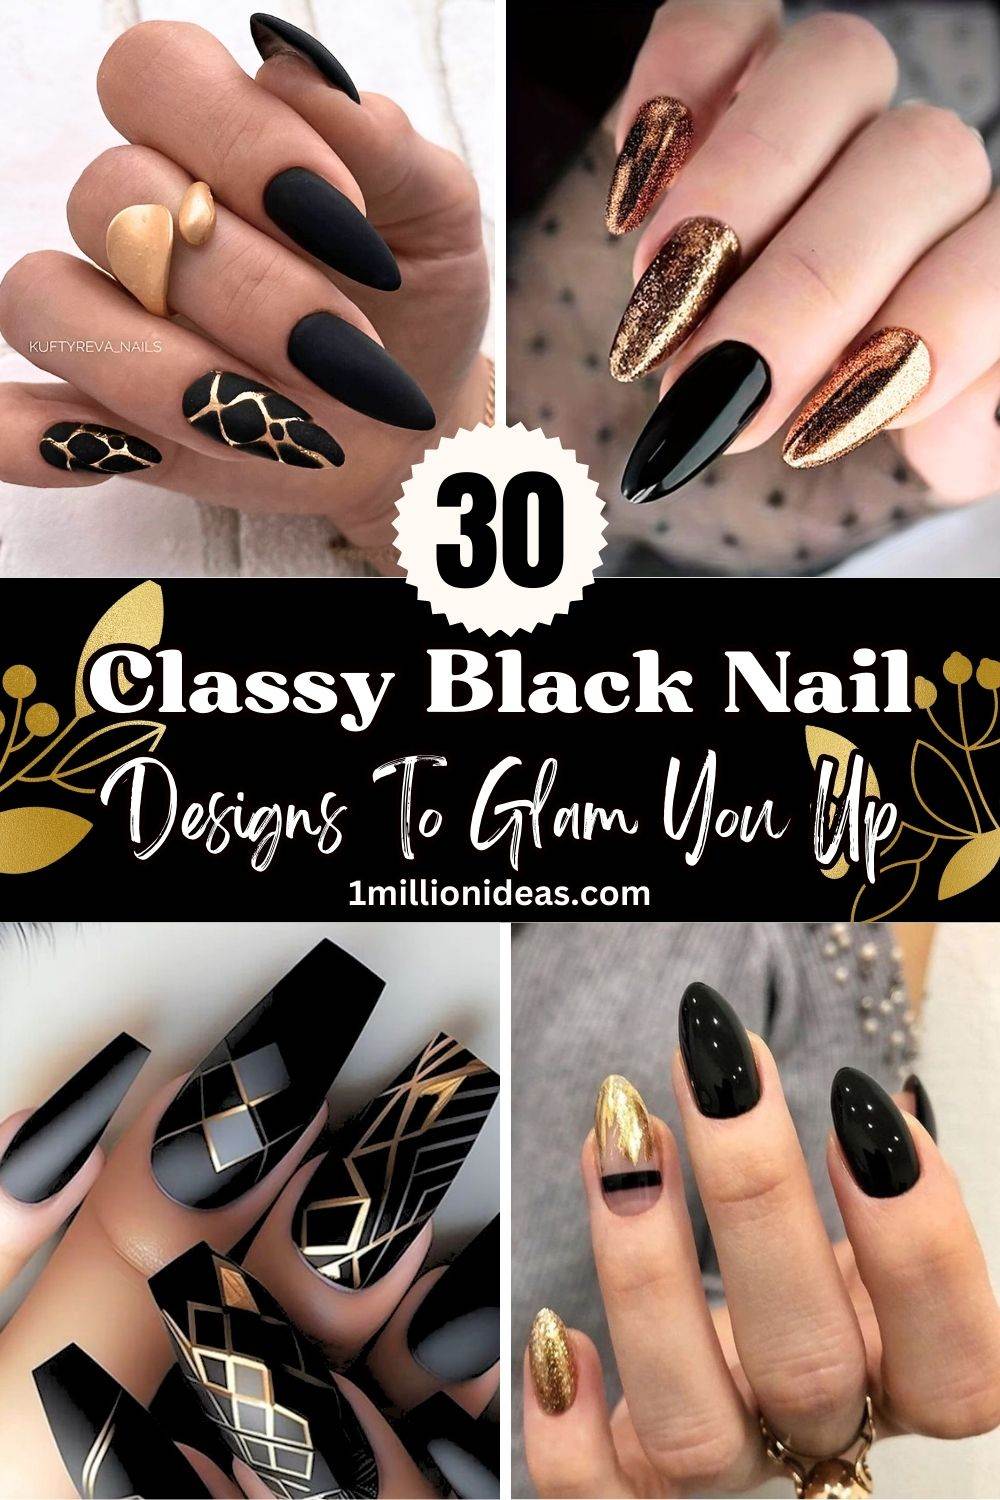 30 Classy Black Nail Designs To Glam You Up - 191